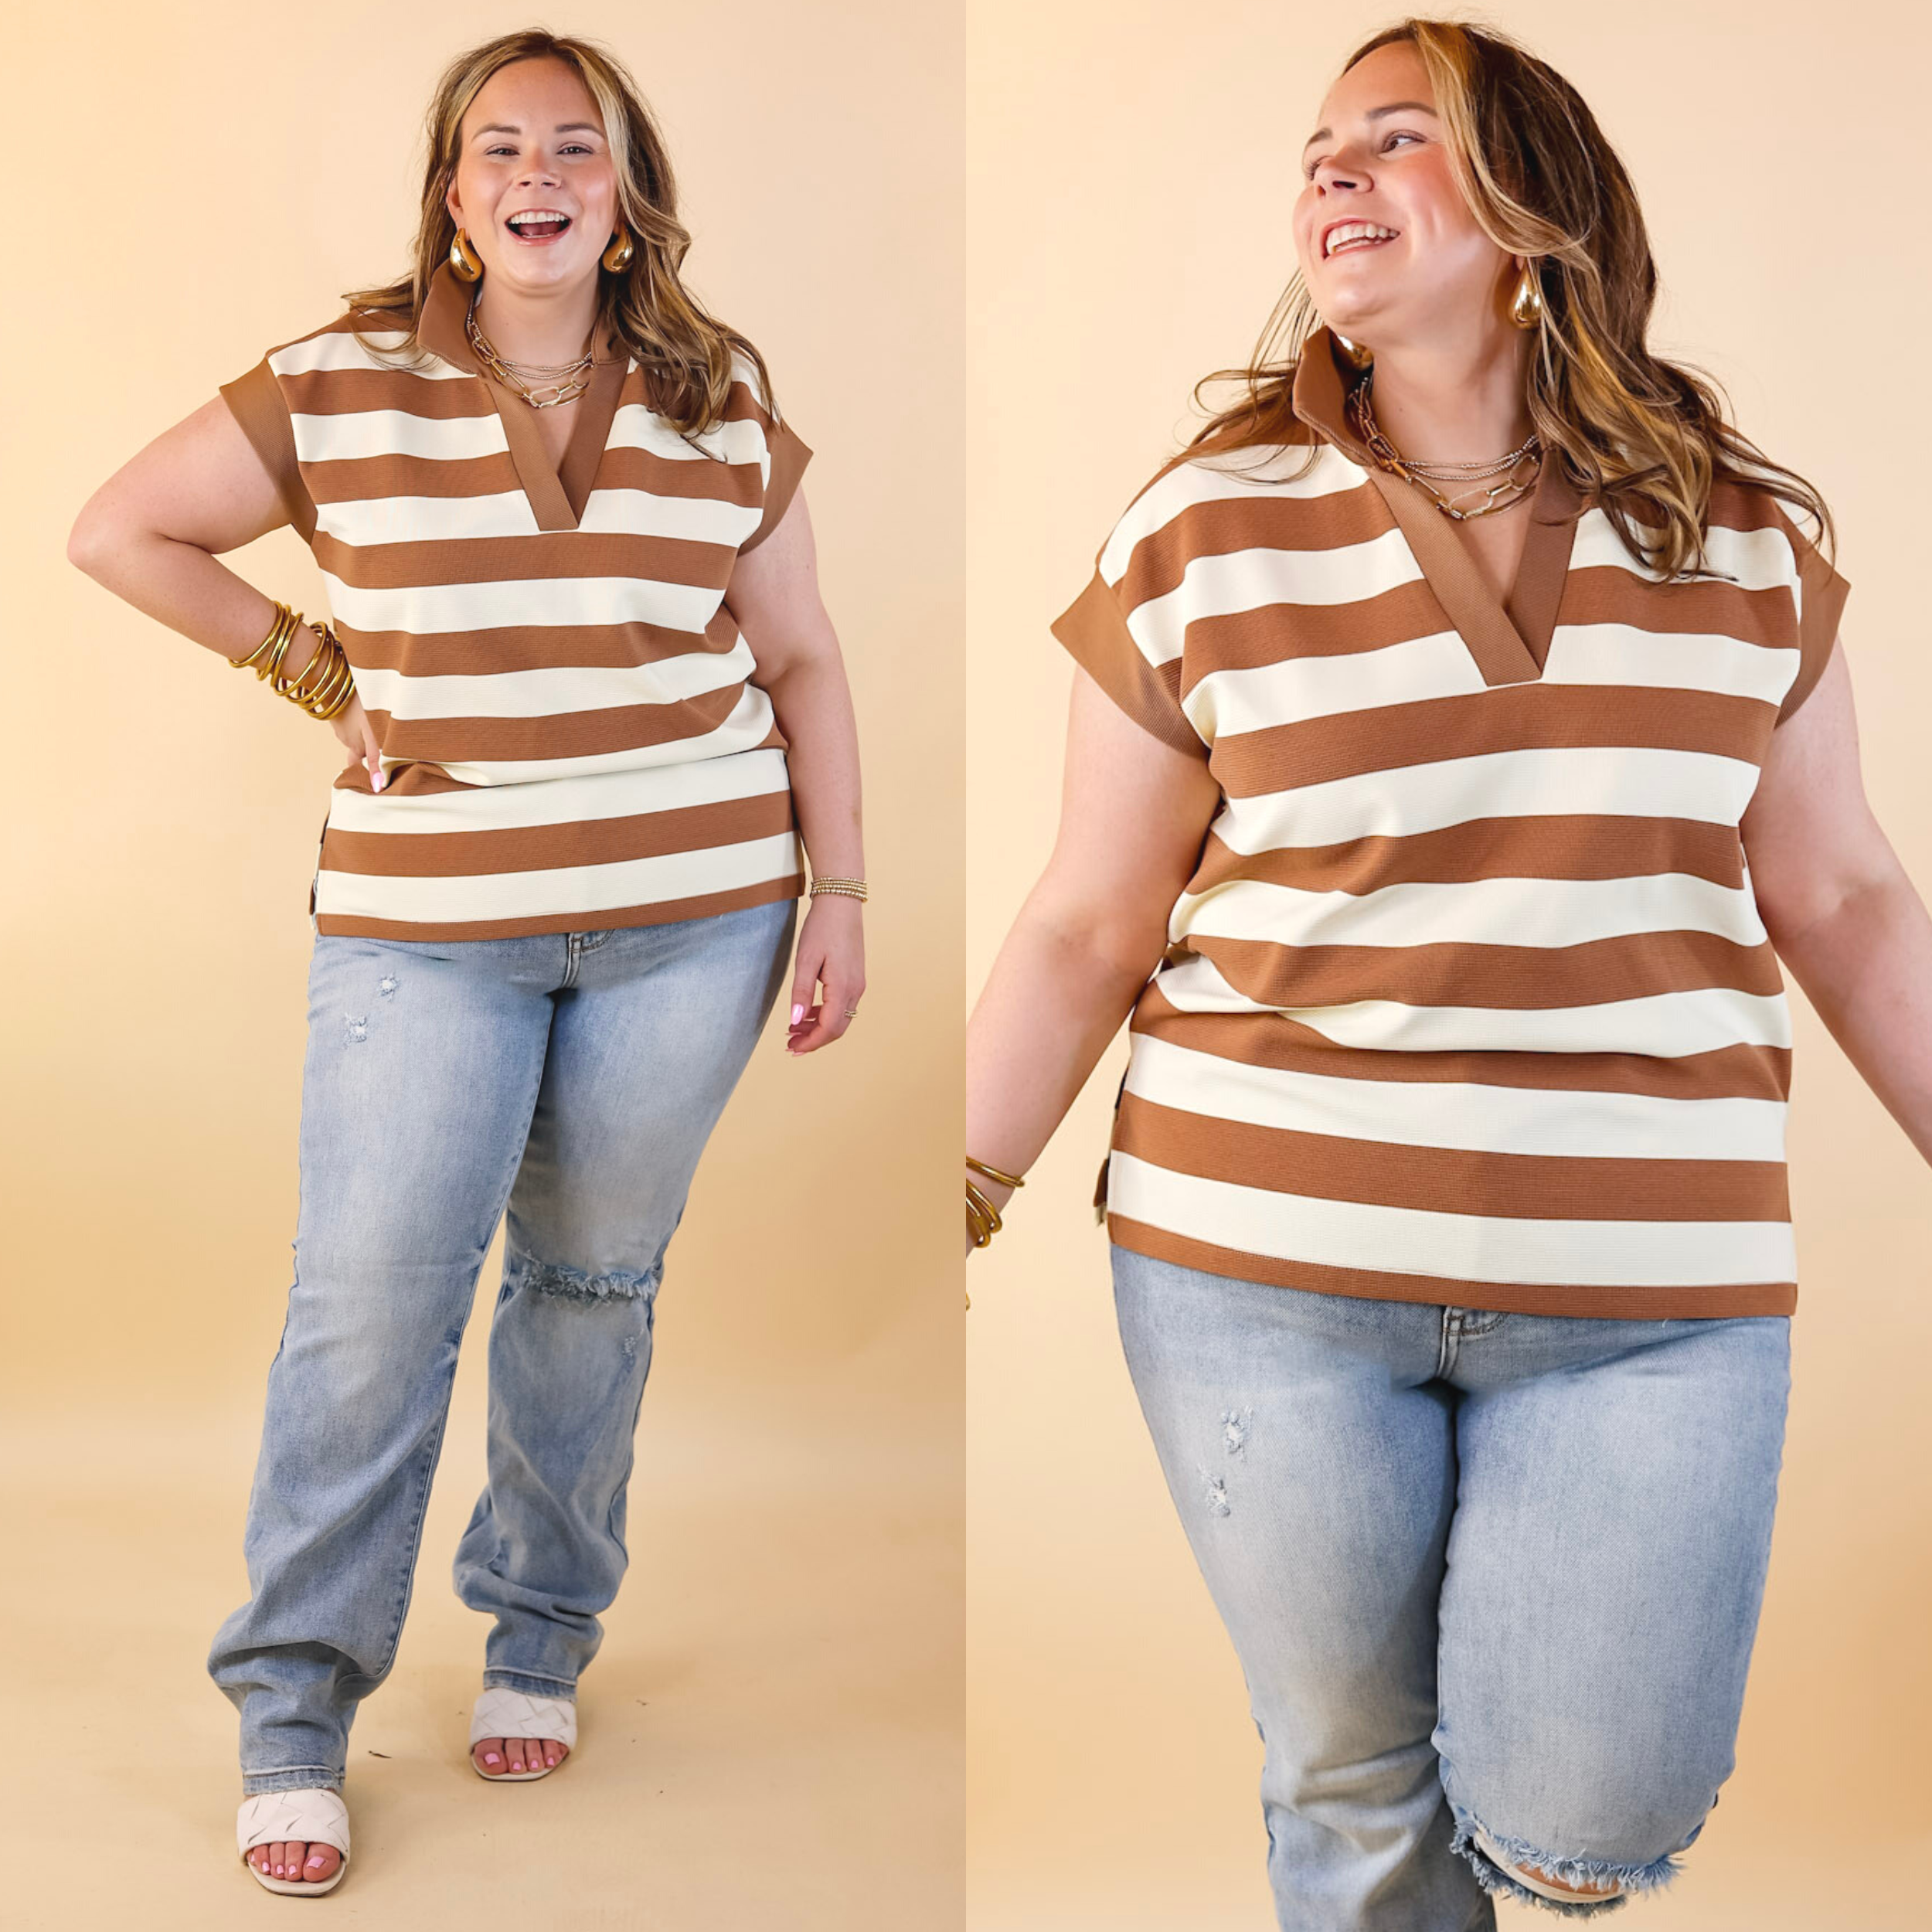 Stripe it Simple Collared Stripe Top with Drop Sleeves in Taupe and Cream - Giddy Up Glamour Boutique